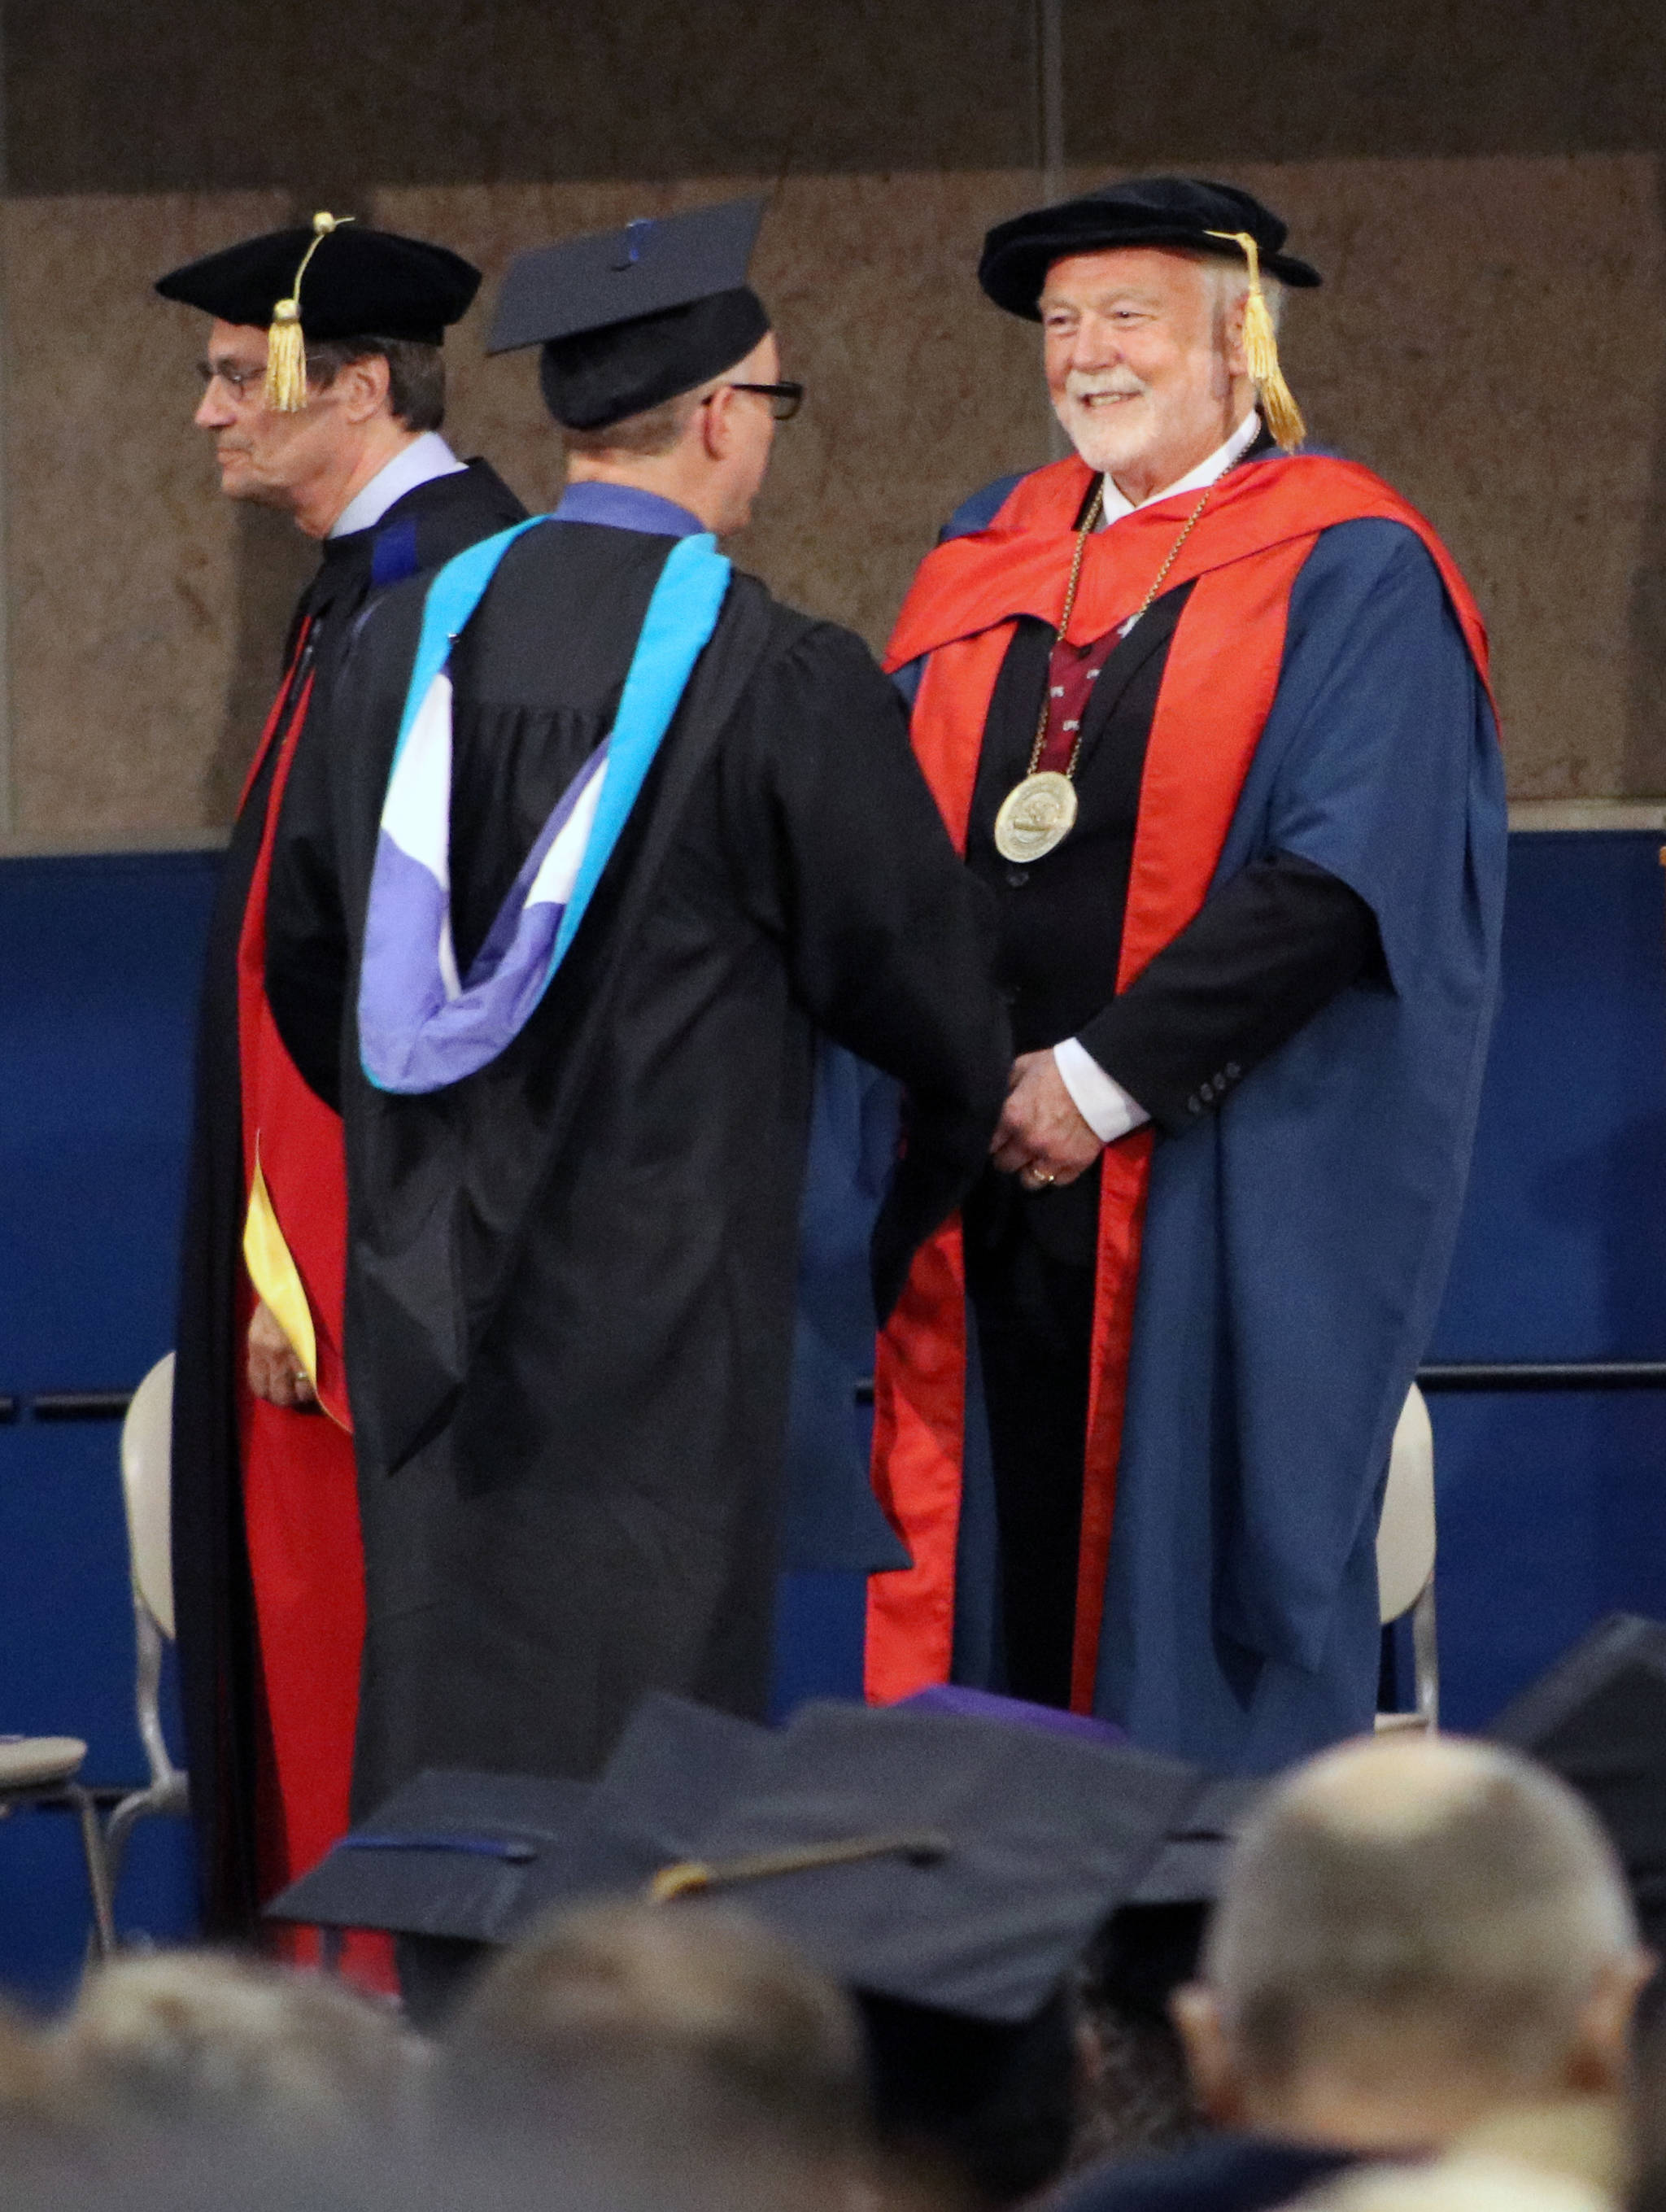 University of Alaska Southeast Chancellor Richard Caulfield congratulates a graduate during the UAS commencement ceremony on Sunday, May 5, 2019. “We are enormously proud of our graduates at all three UAS campuses. Many of our students are first-generation college students and are completing their degree while raising a family and working one or two jobs. Every one of them chose to advance their skills and education at UAS as a pathway to improving their life and that of their family and community,” Caulfield said. (Erin Laughlin | For the Juneau Empire)